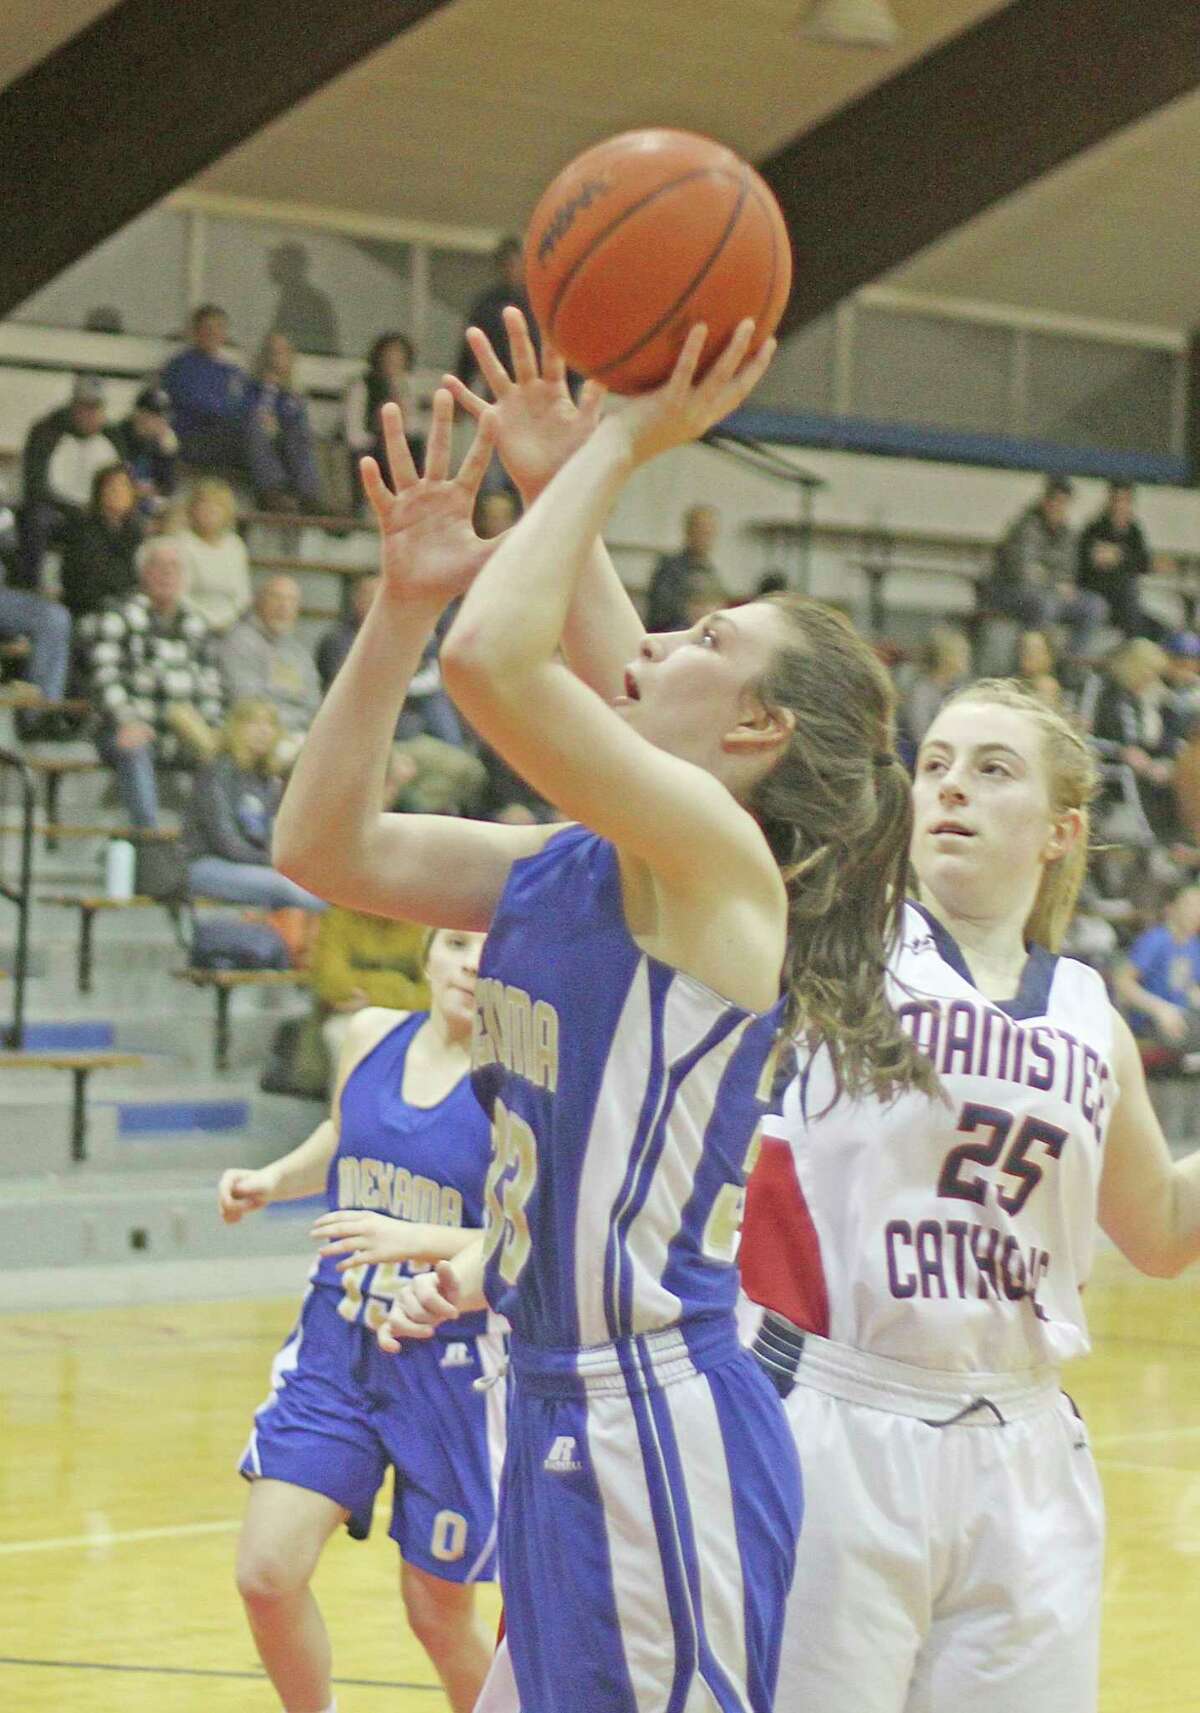 Onekama's Colleen McCarthy was an honorable mention on this year's BCAM's best list for Division 4. (News Advocate file photo)